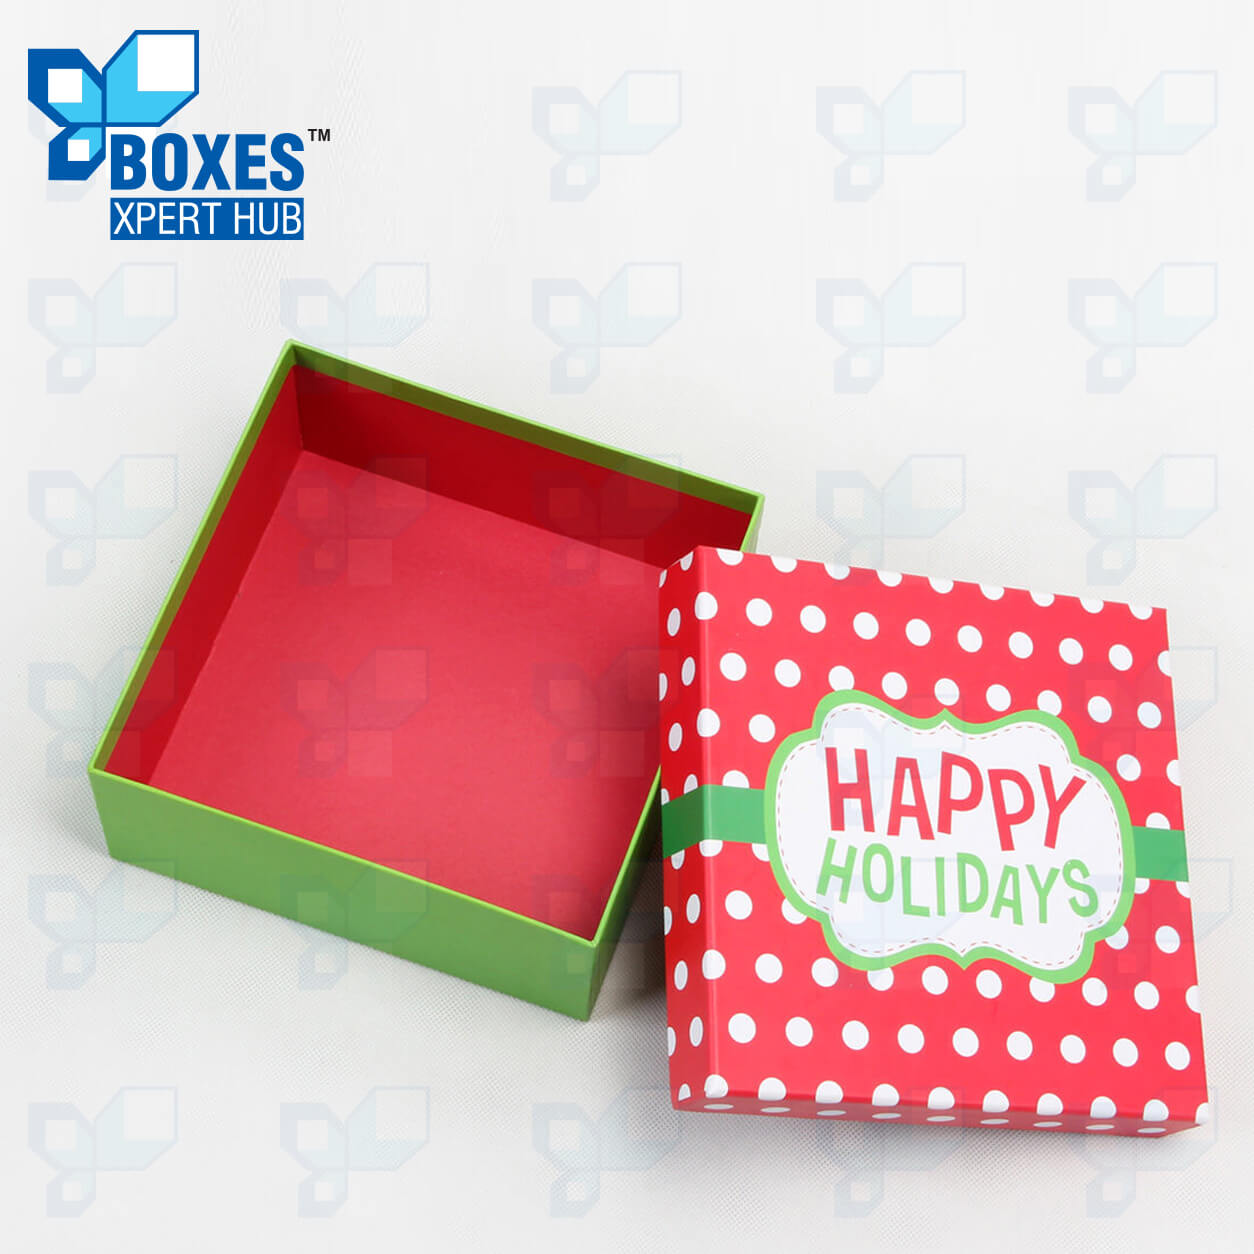 Happy Holidays Boxes